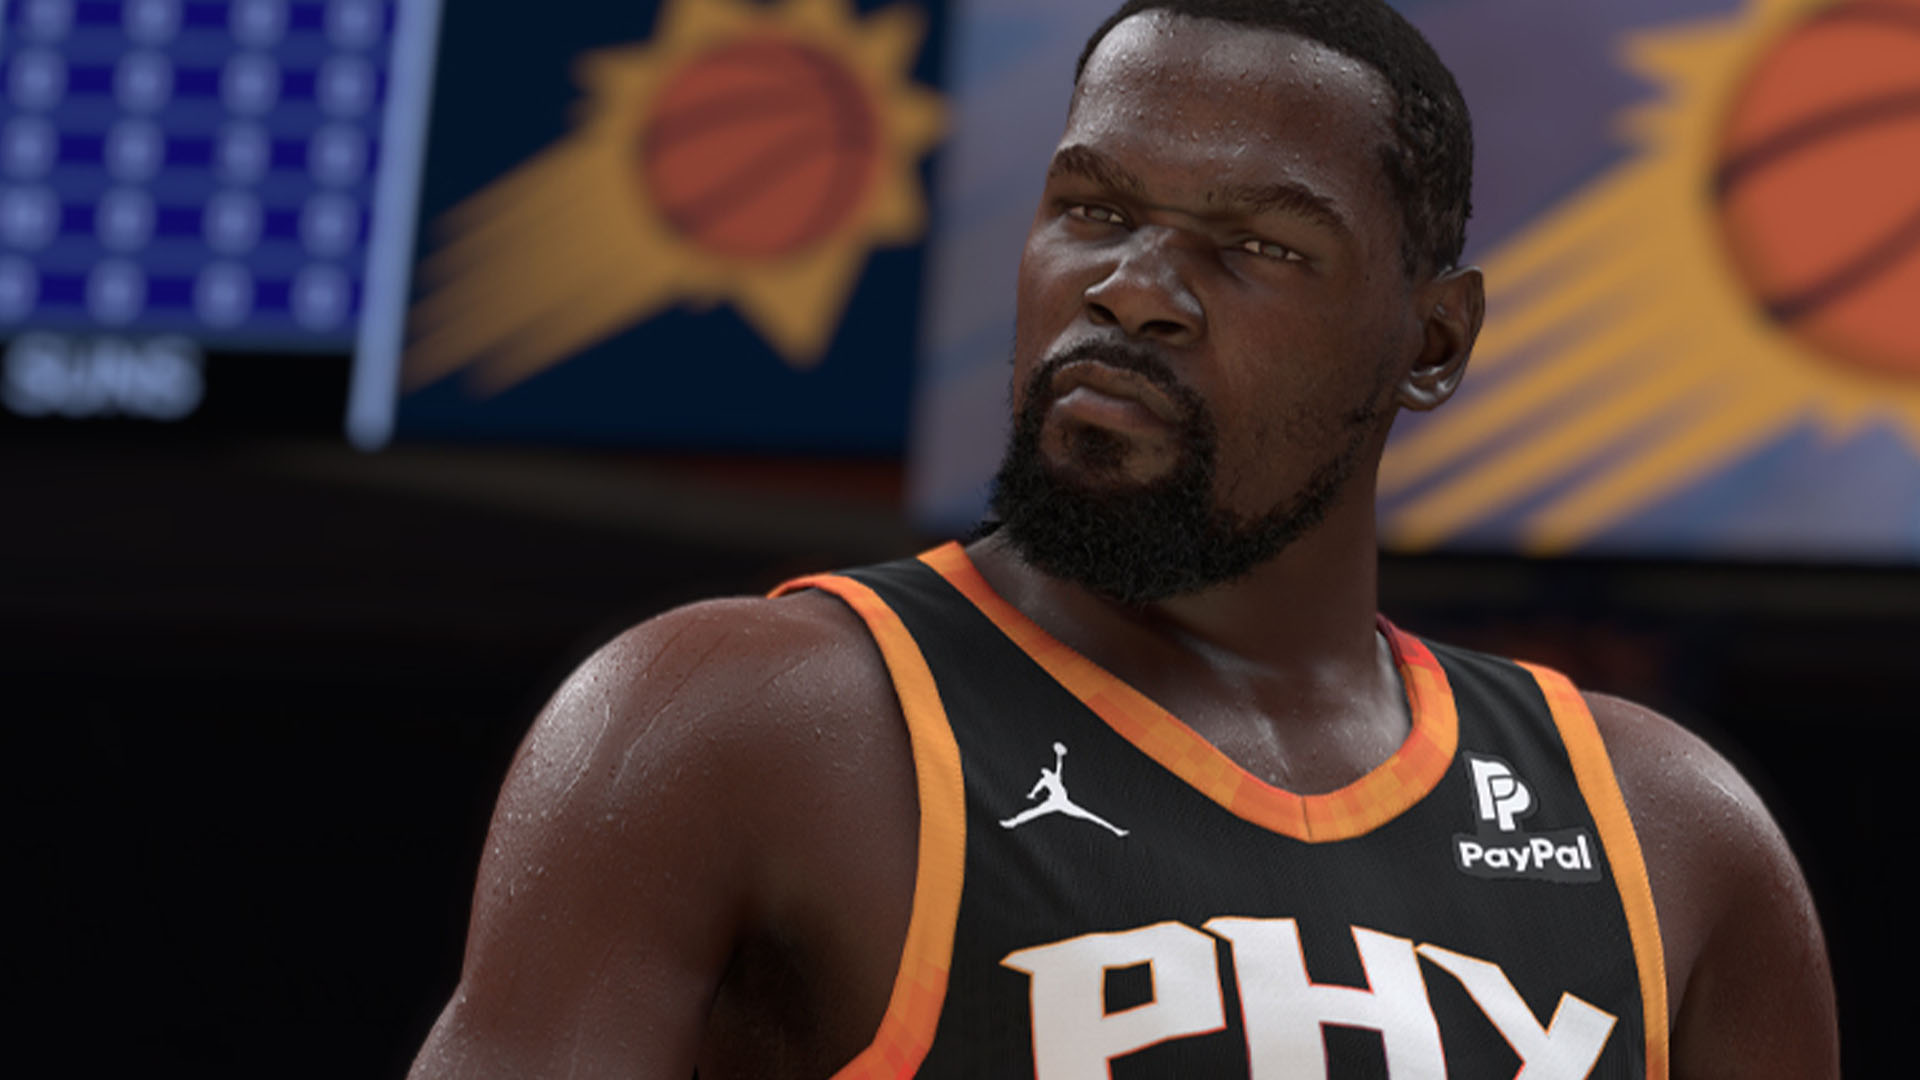 NBA 2K24 is a SCAM & Steam Reviewers Are PISSED! 